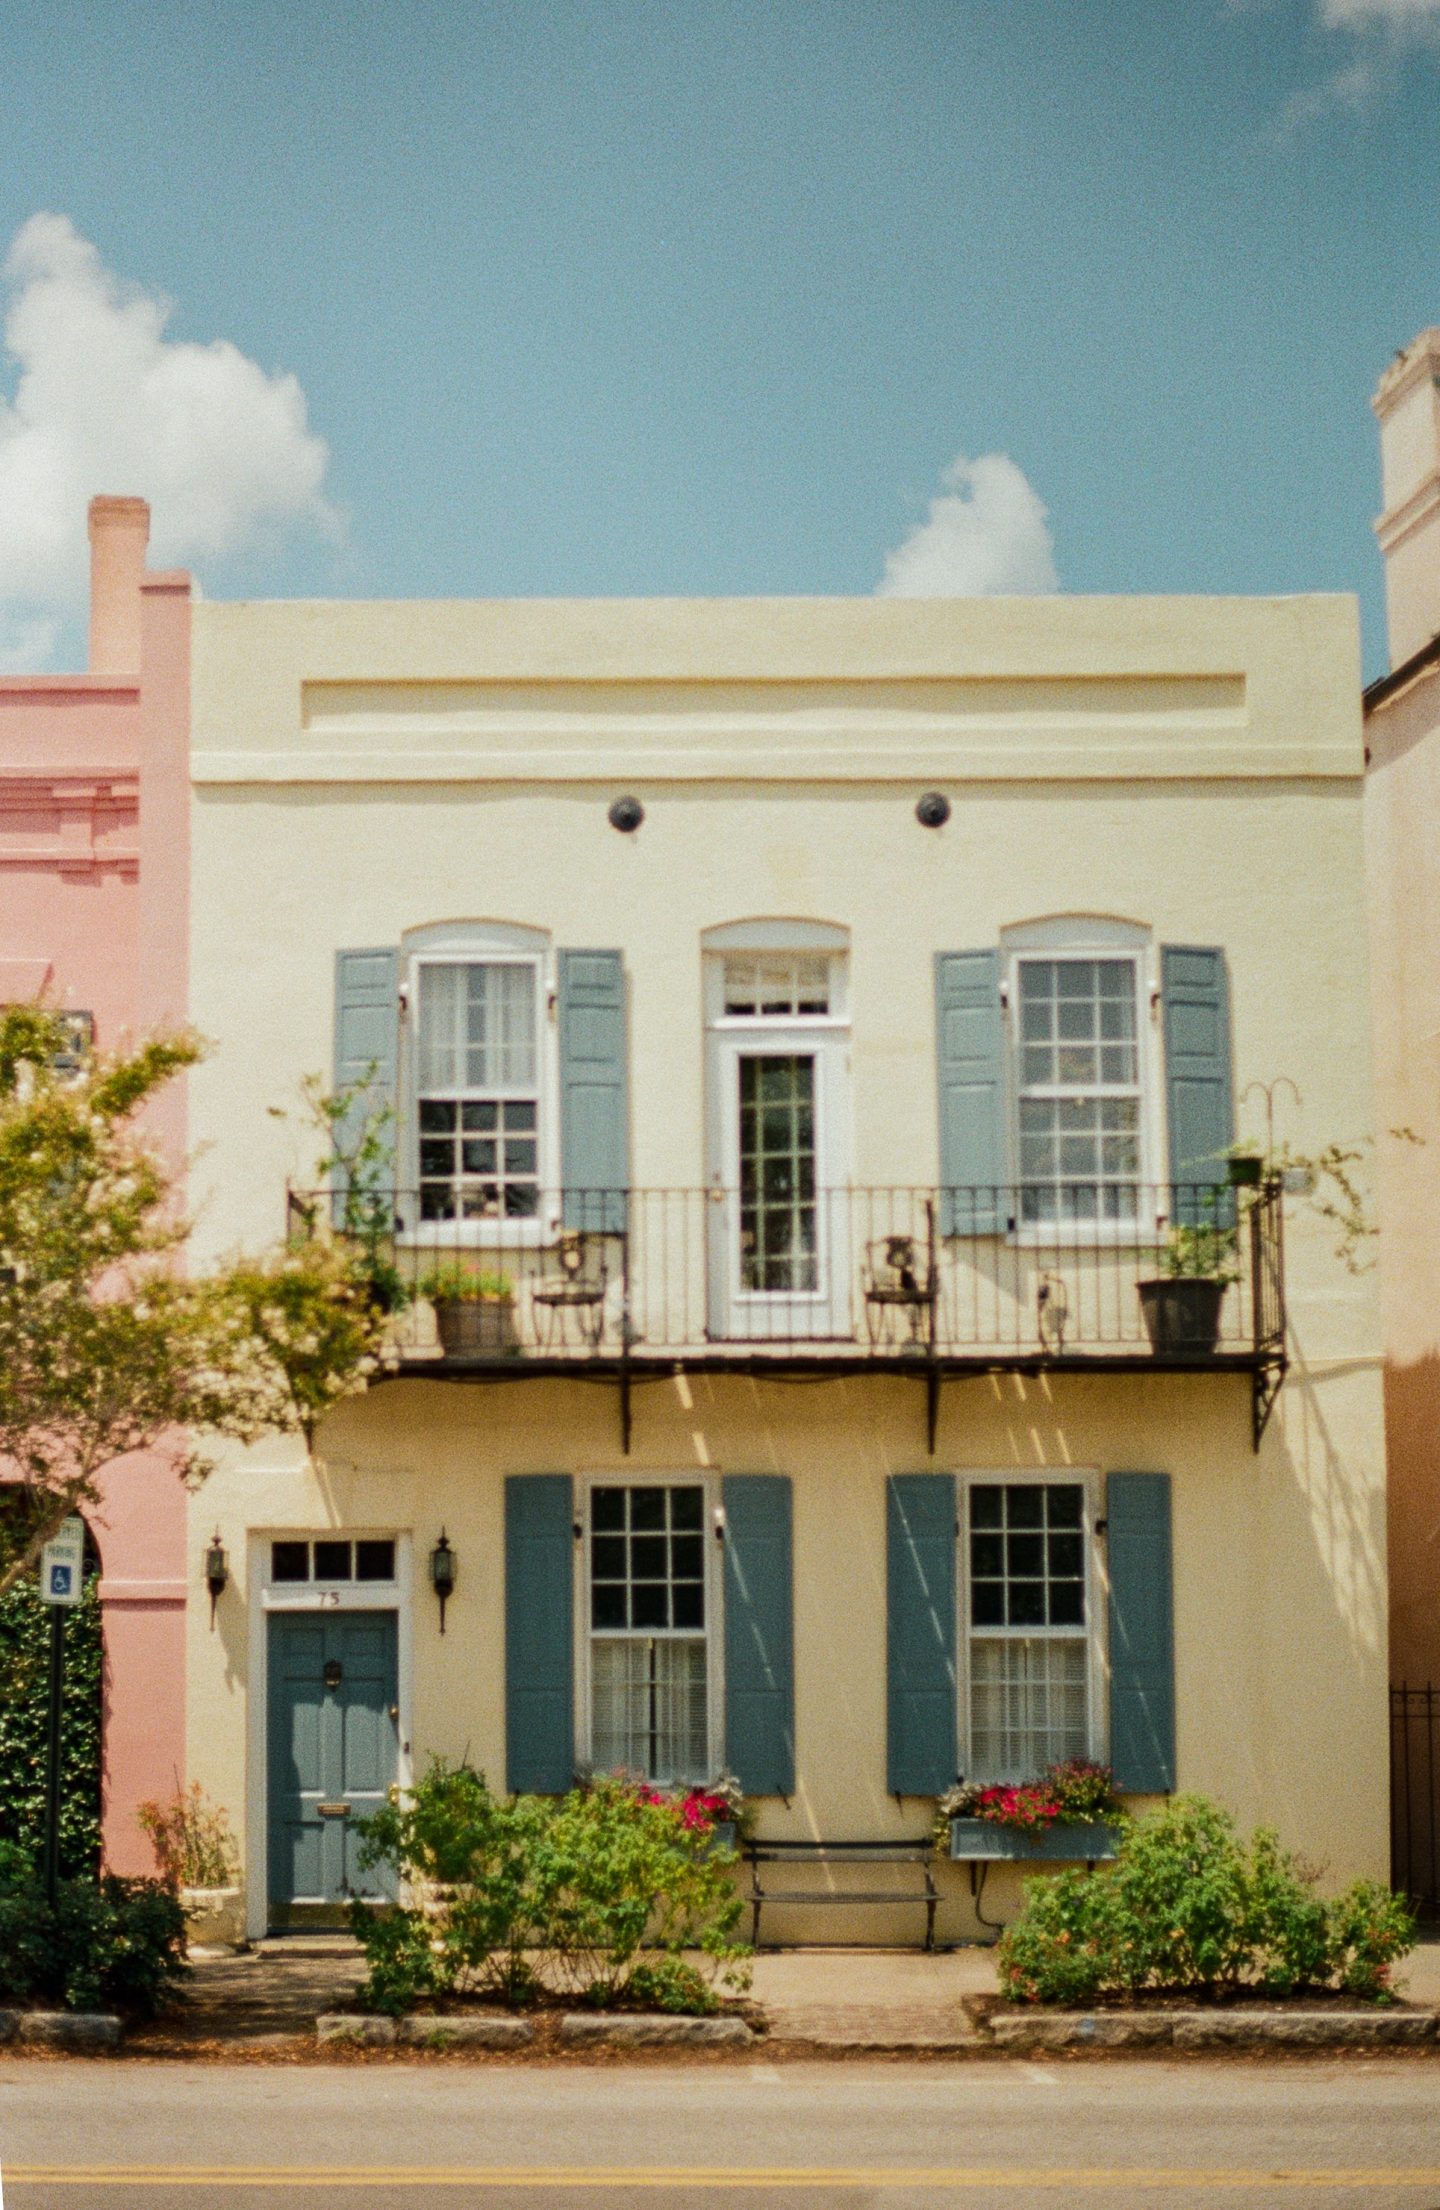 Charleston, South Carolina is in my top 10 favorite beautiful places in the US to visit.